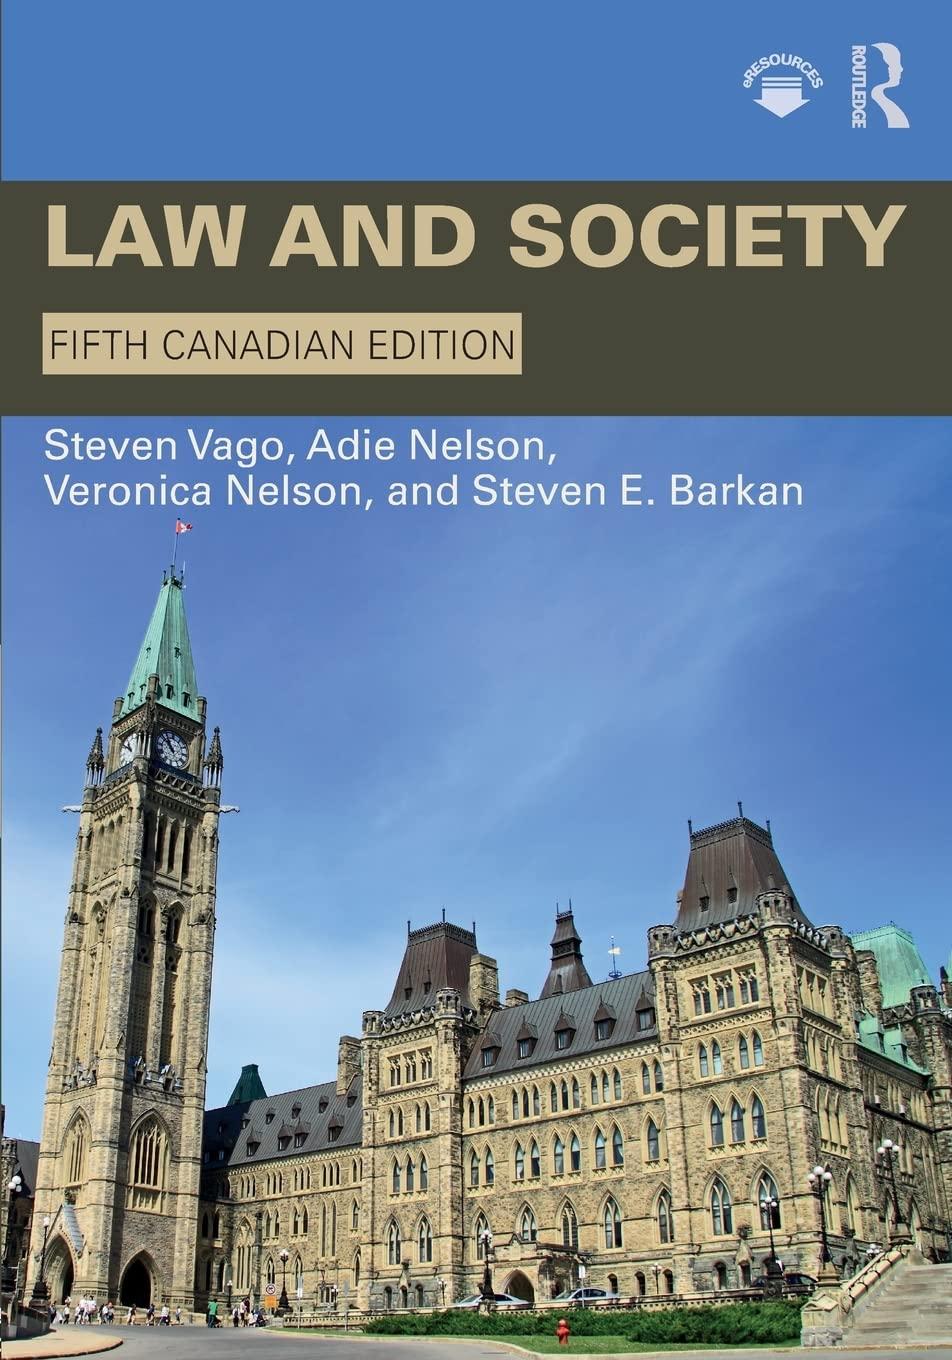 law and society 5th canadian edition steven vago , adie nelson , veronica nelson , steven e. barkan